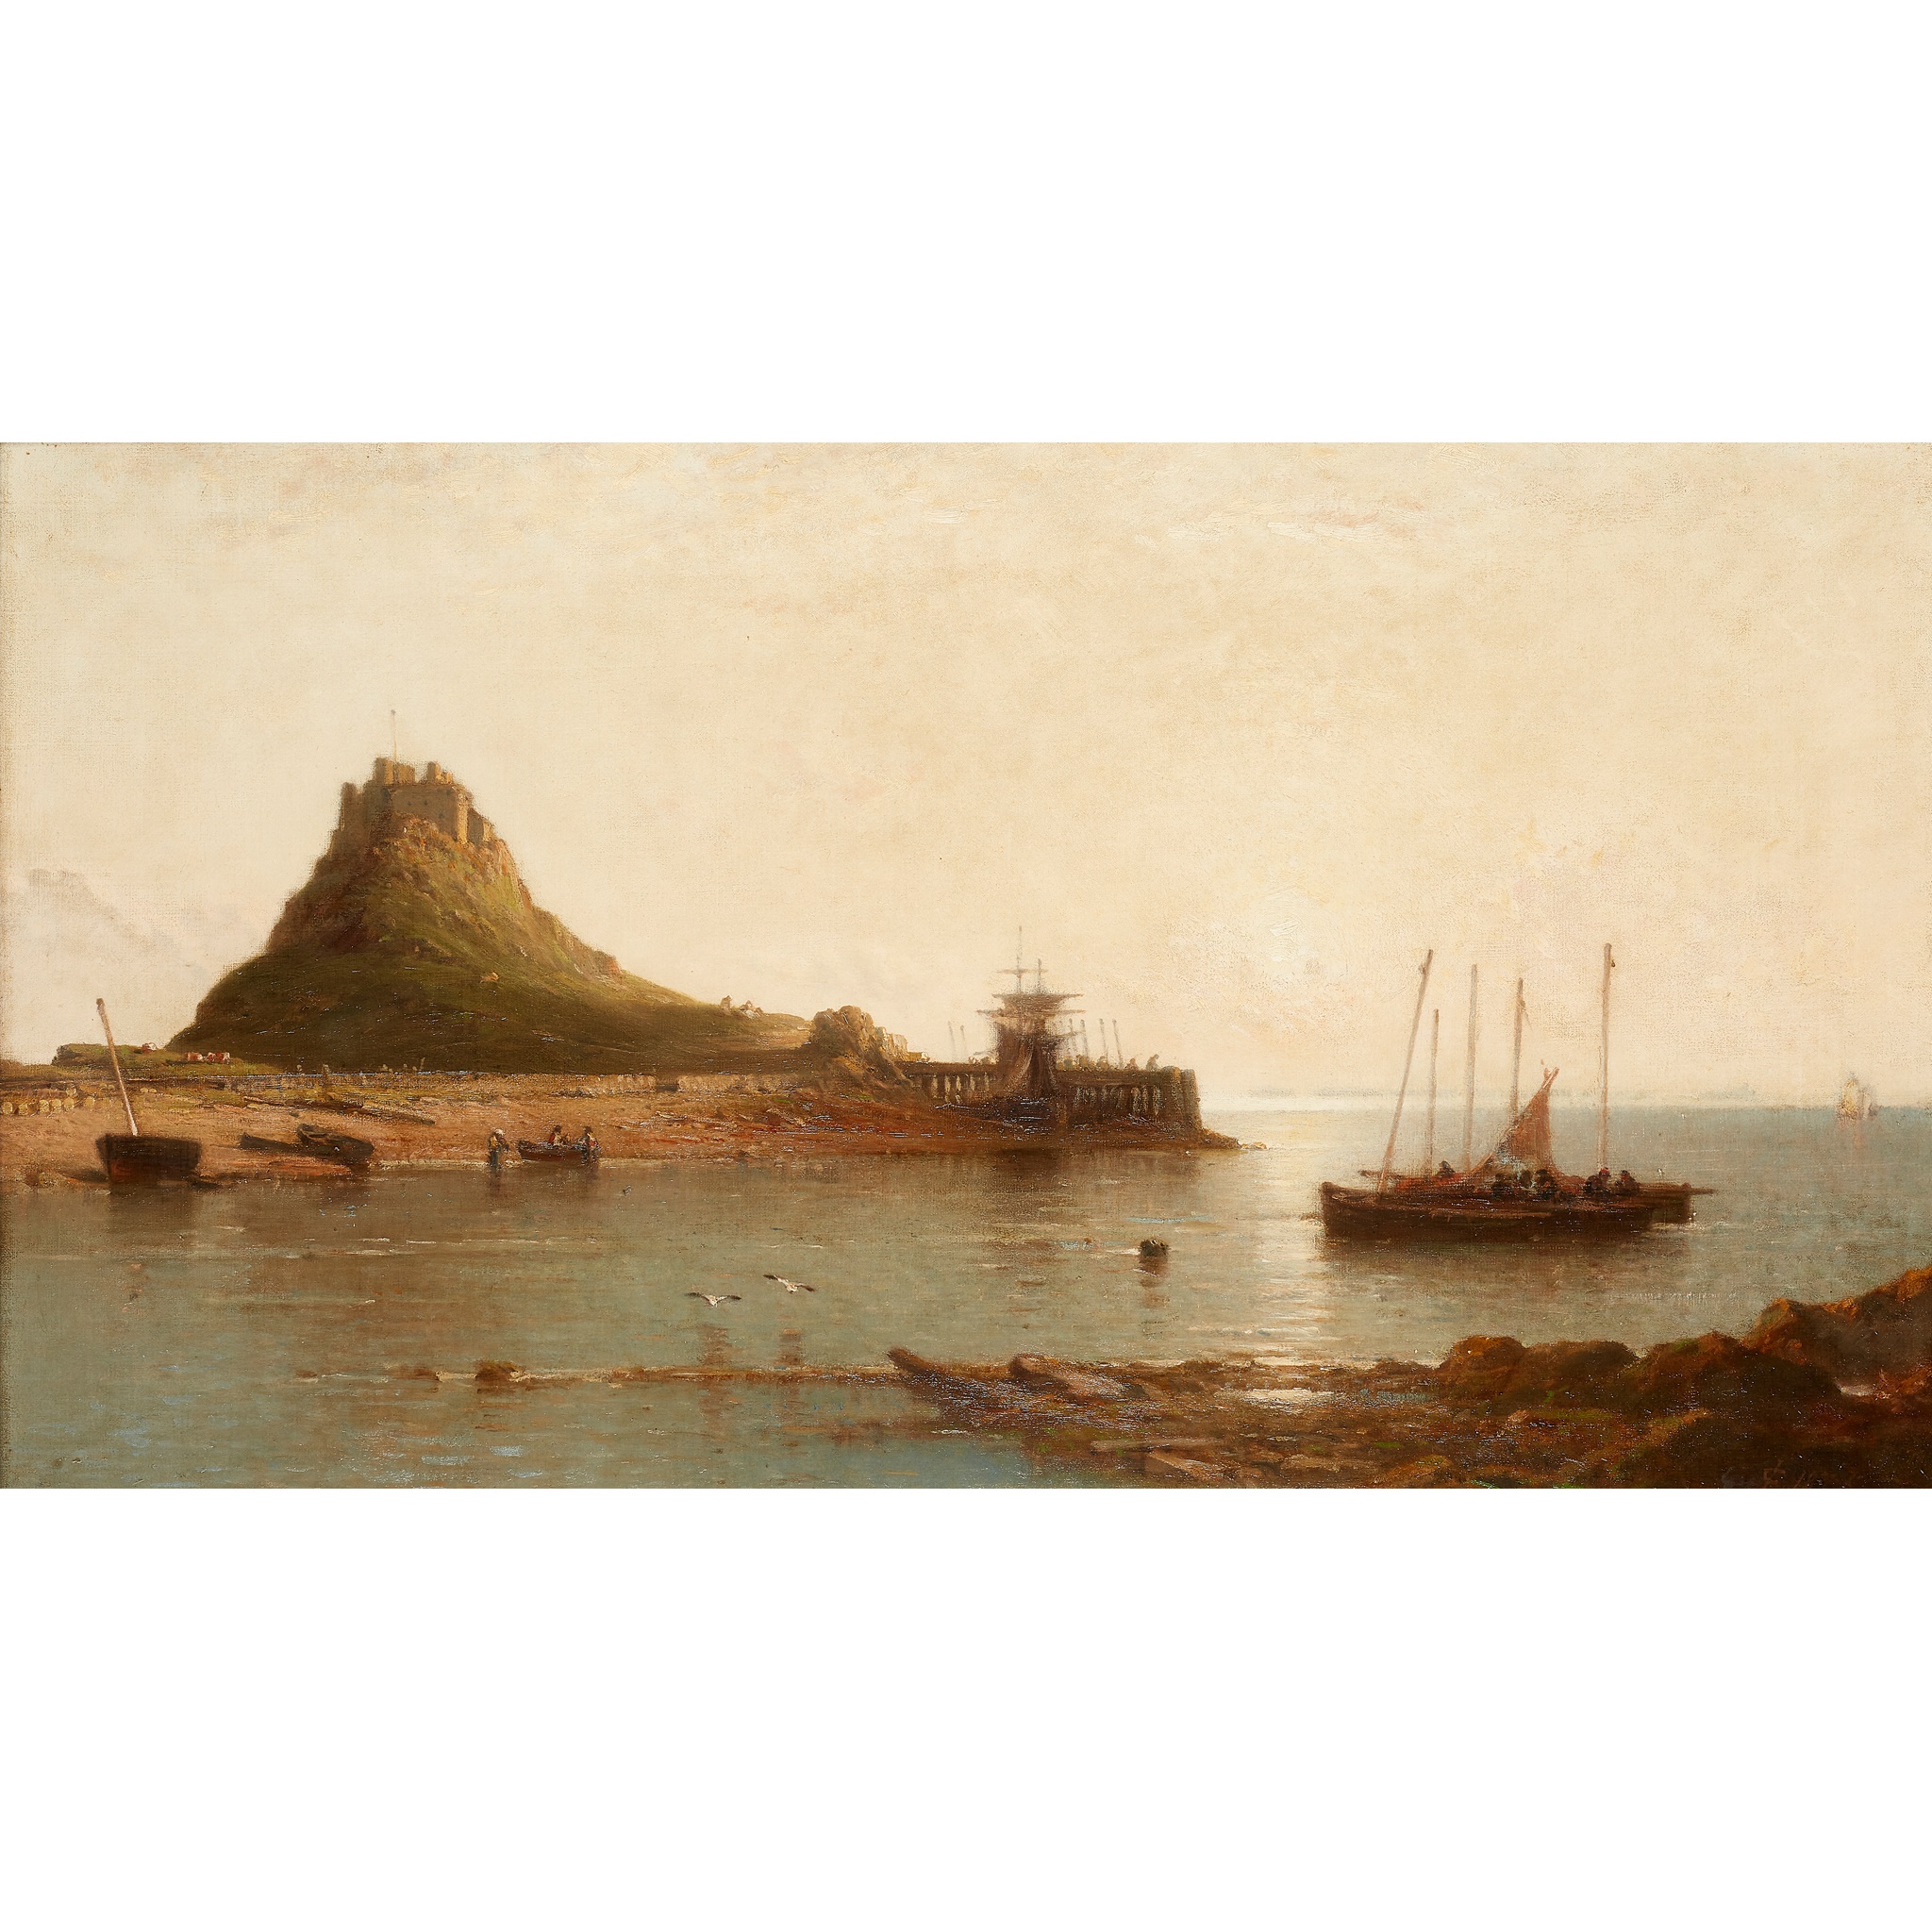 JAMES CASSIE R.S.A., R.S.W. (SCOTTISH 1819-1879) HOLY ISLAND CASTLE AND SUNRISE